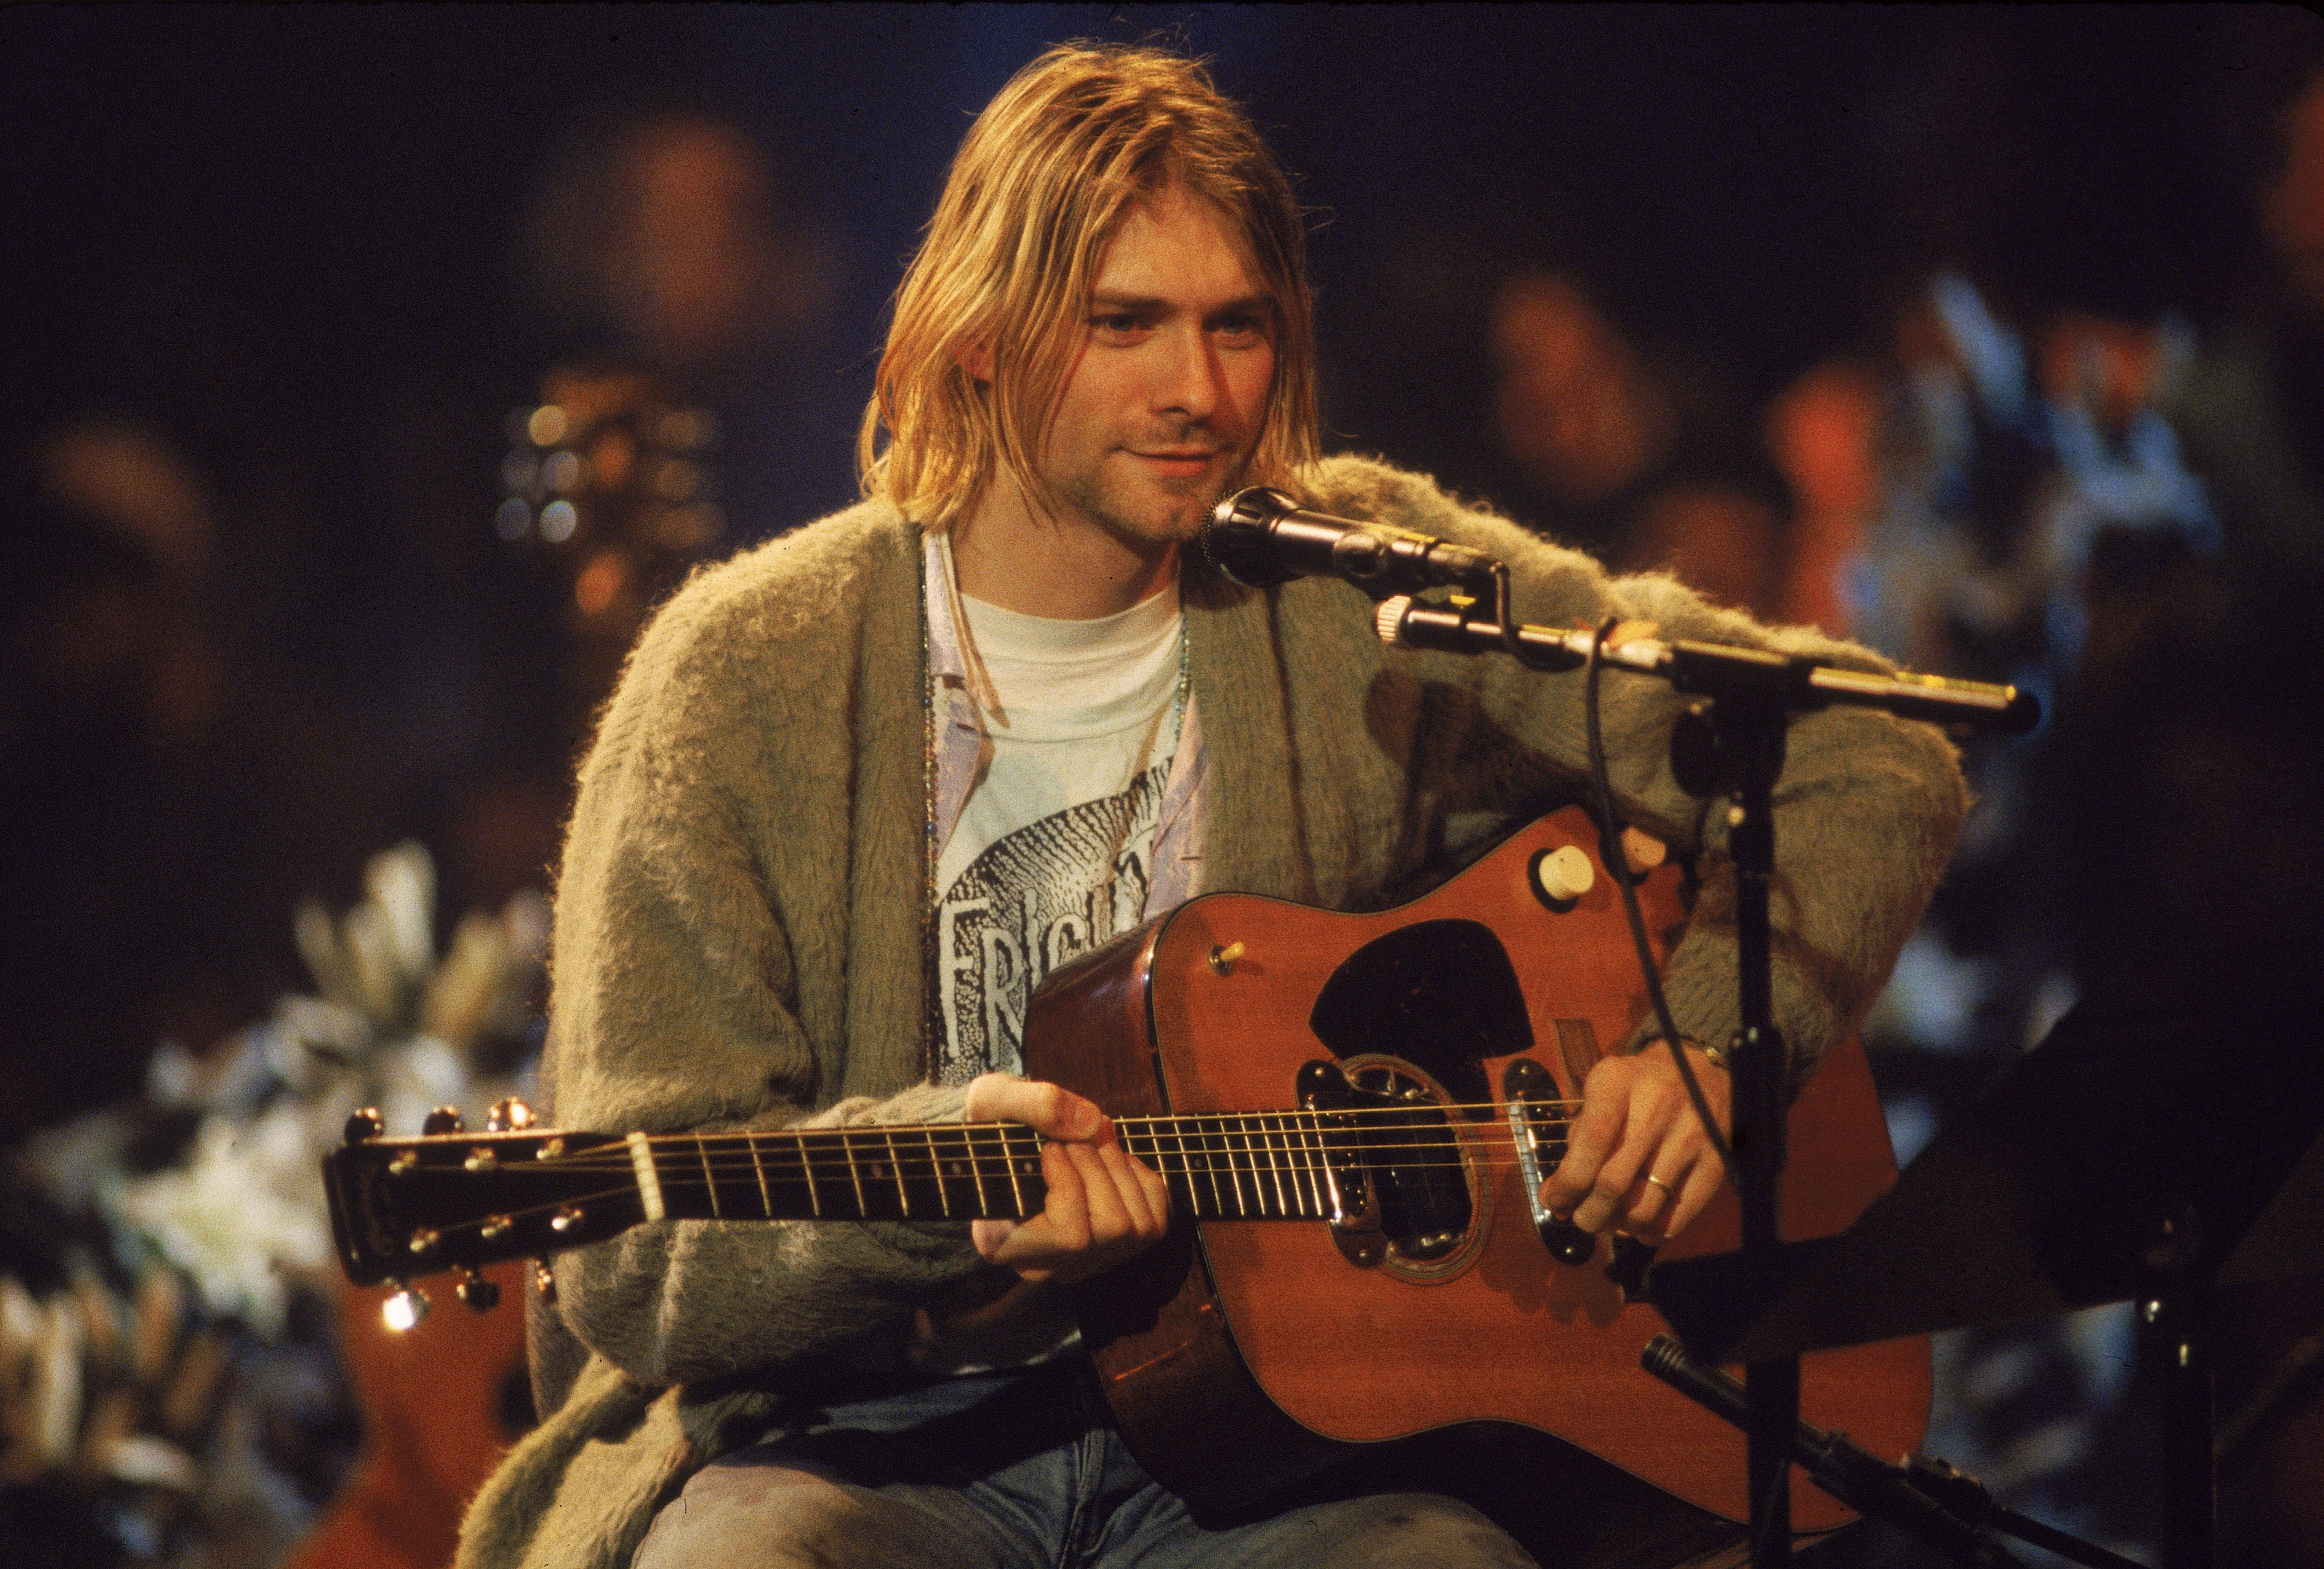 Kurt Cobain performng on 'MTV Unplugged,' in New York on November 18, 1993 | Source: Getty Images